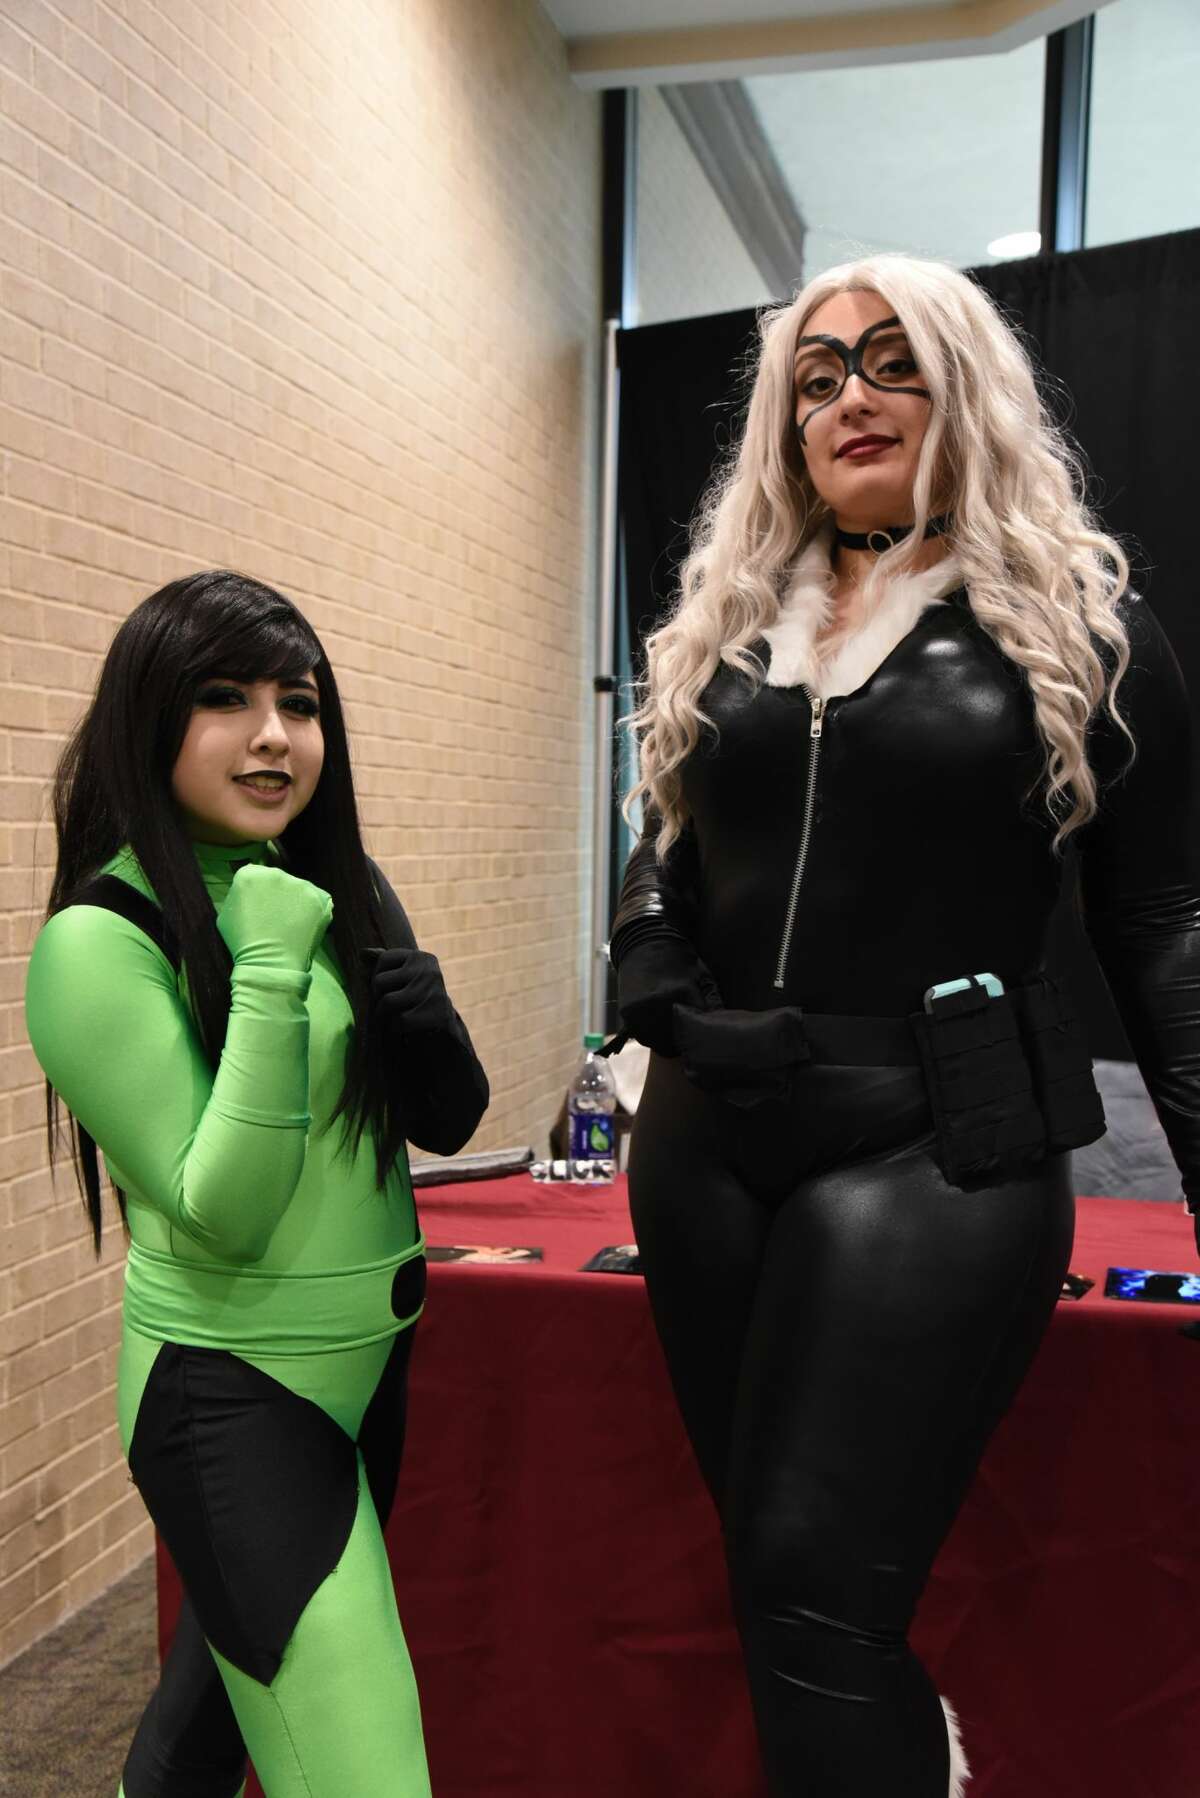 Cosplayers pose for a photo during the Laredo STCE's Comic Con.